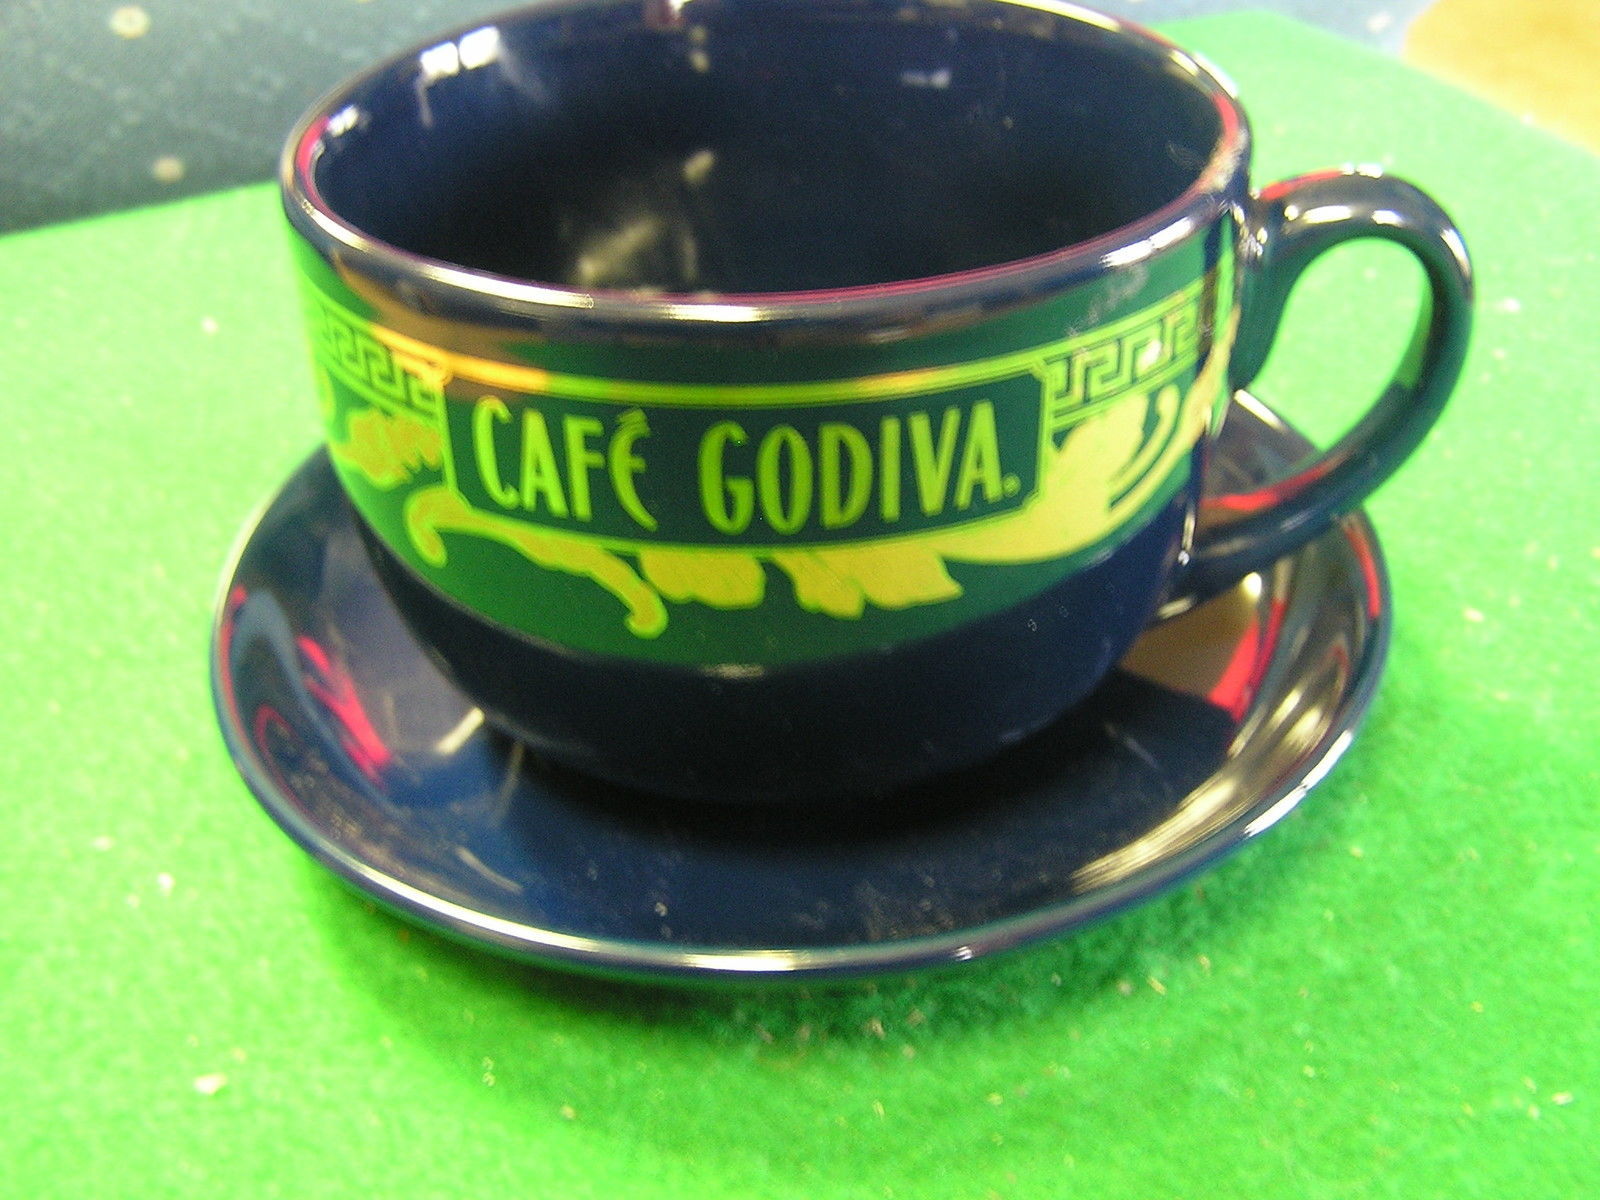 Great California Pantry CAFE GODIVA Cup and Saucer..............FREE POSTAGE USA - $11.49